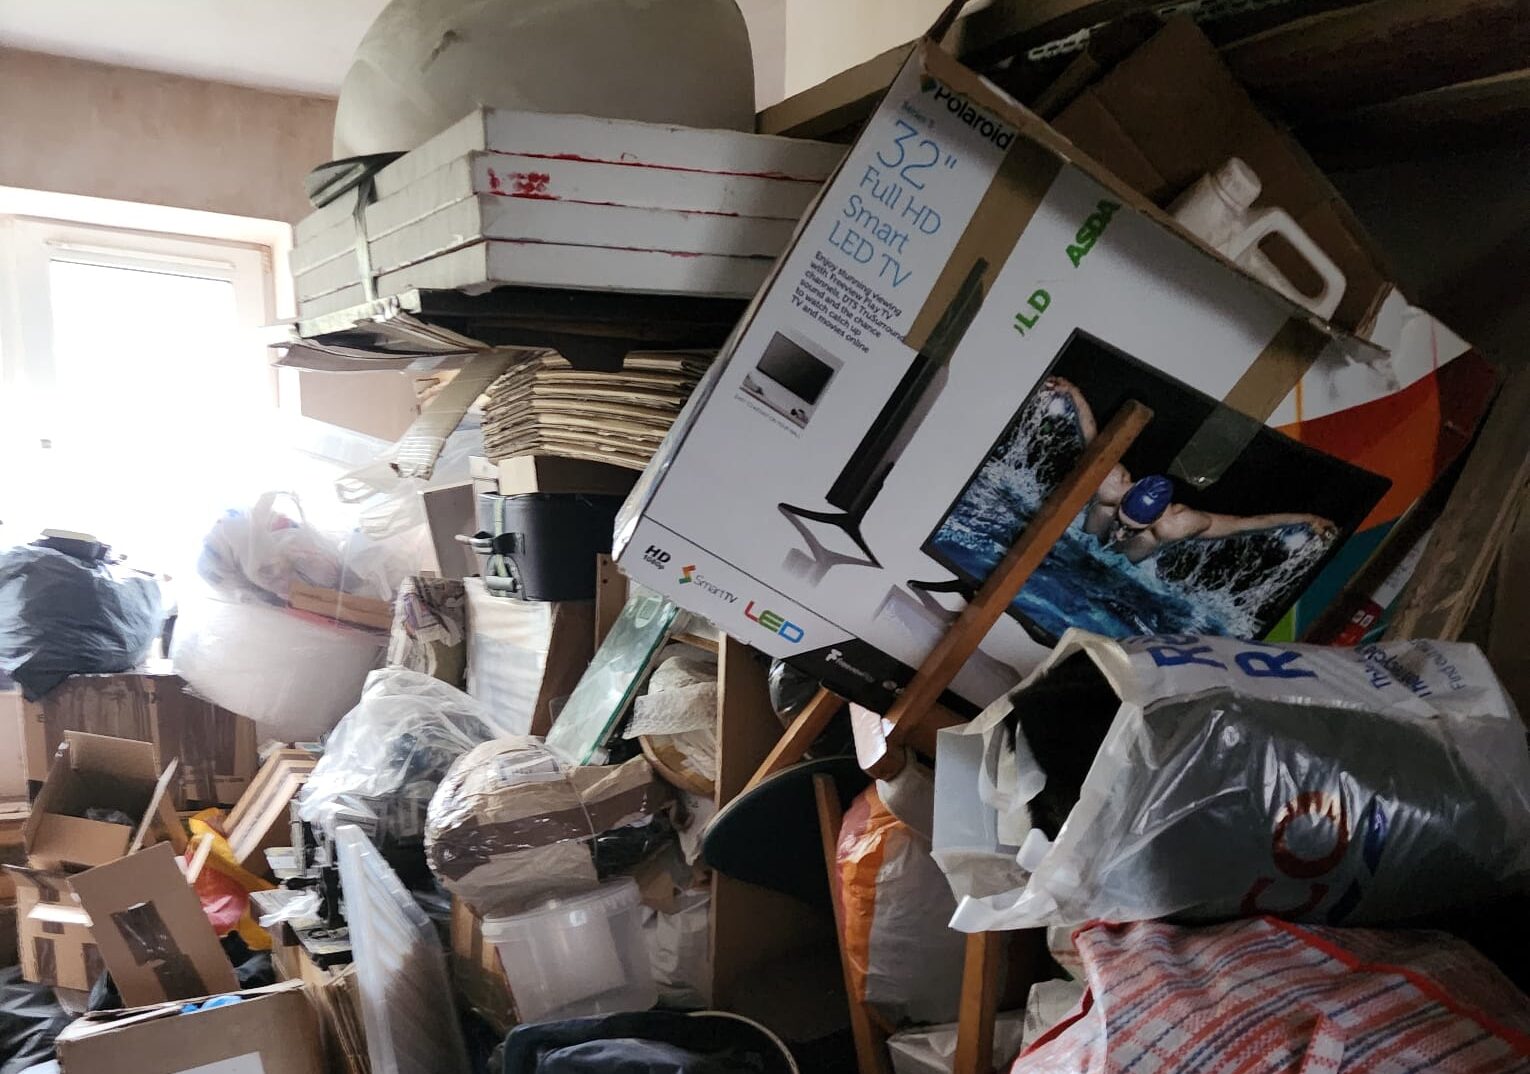 Large pile of personal belongings stored from a hoarding clearance